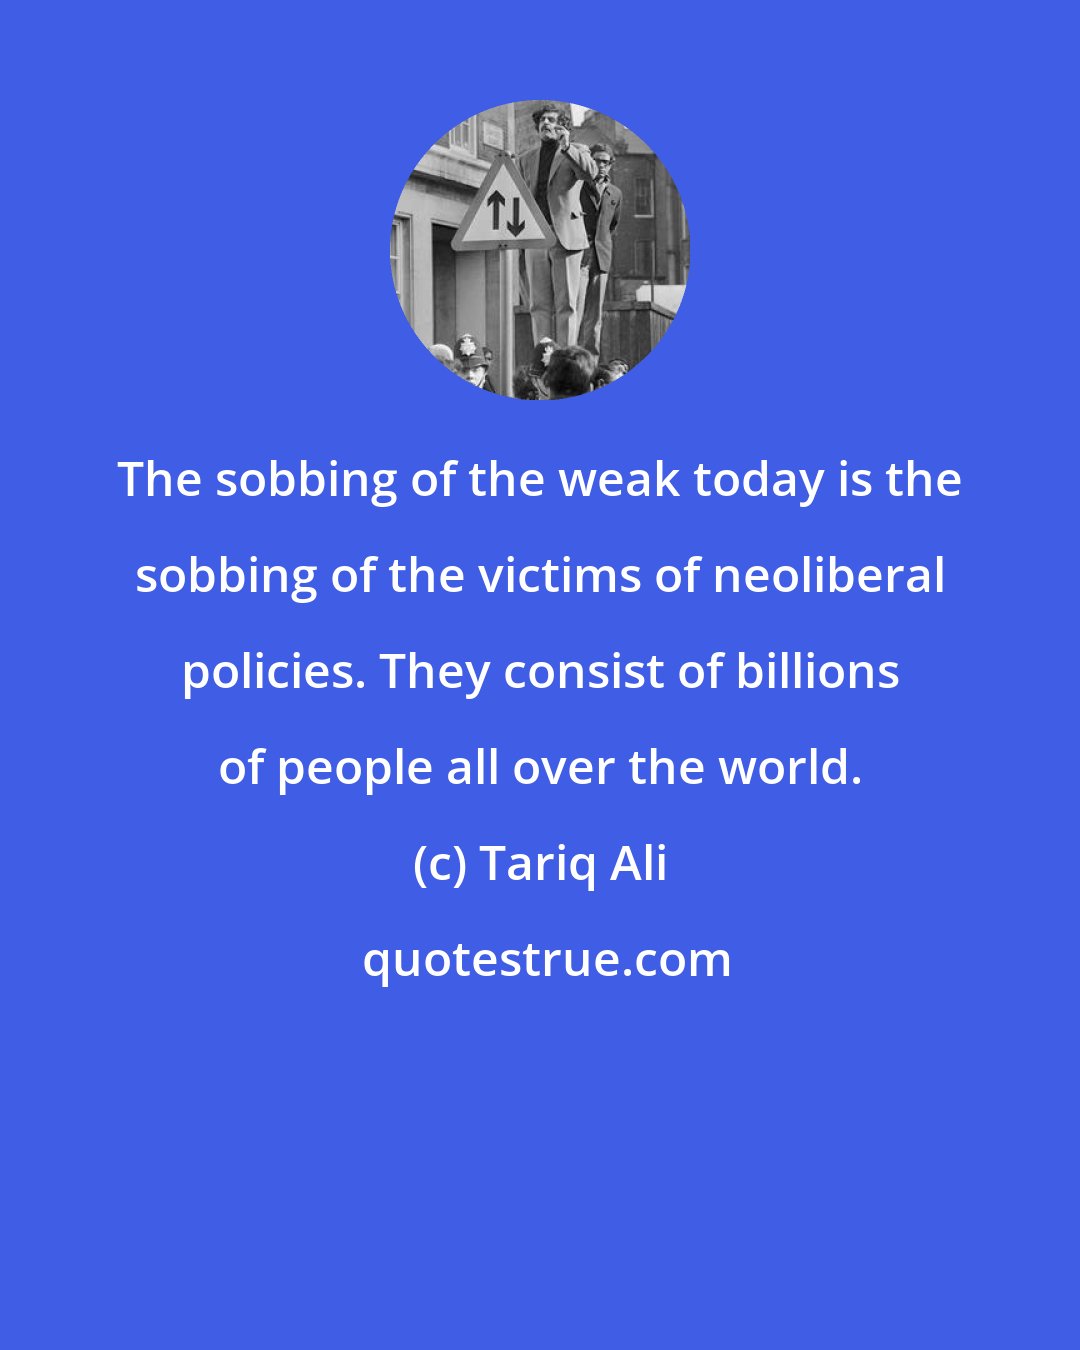 Tariq Ali: The sobbing of the weak today is the sobbing of the victims of neoliberal policies. They consist of billions of people all over the world.